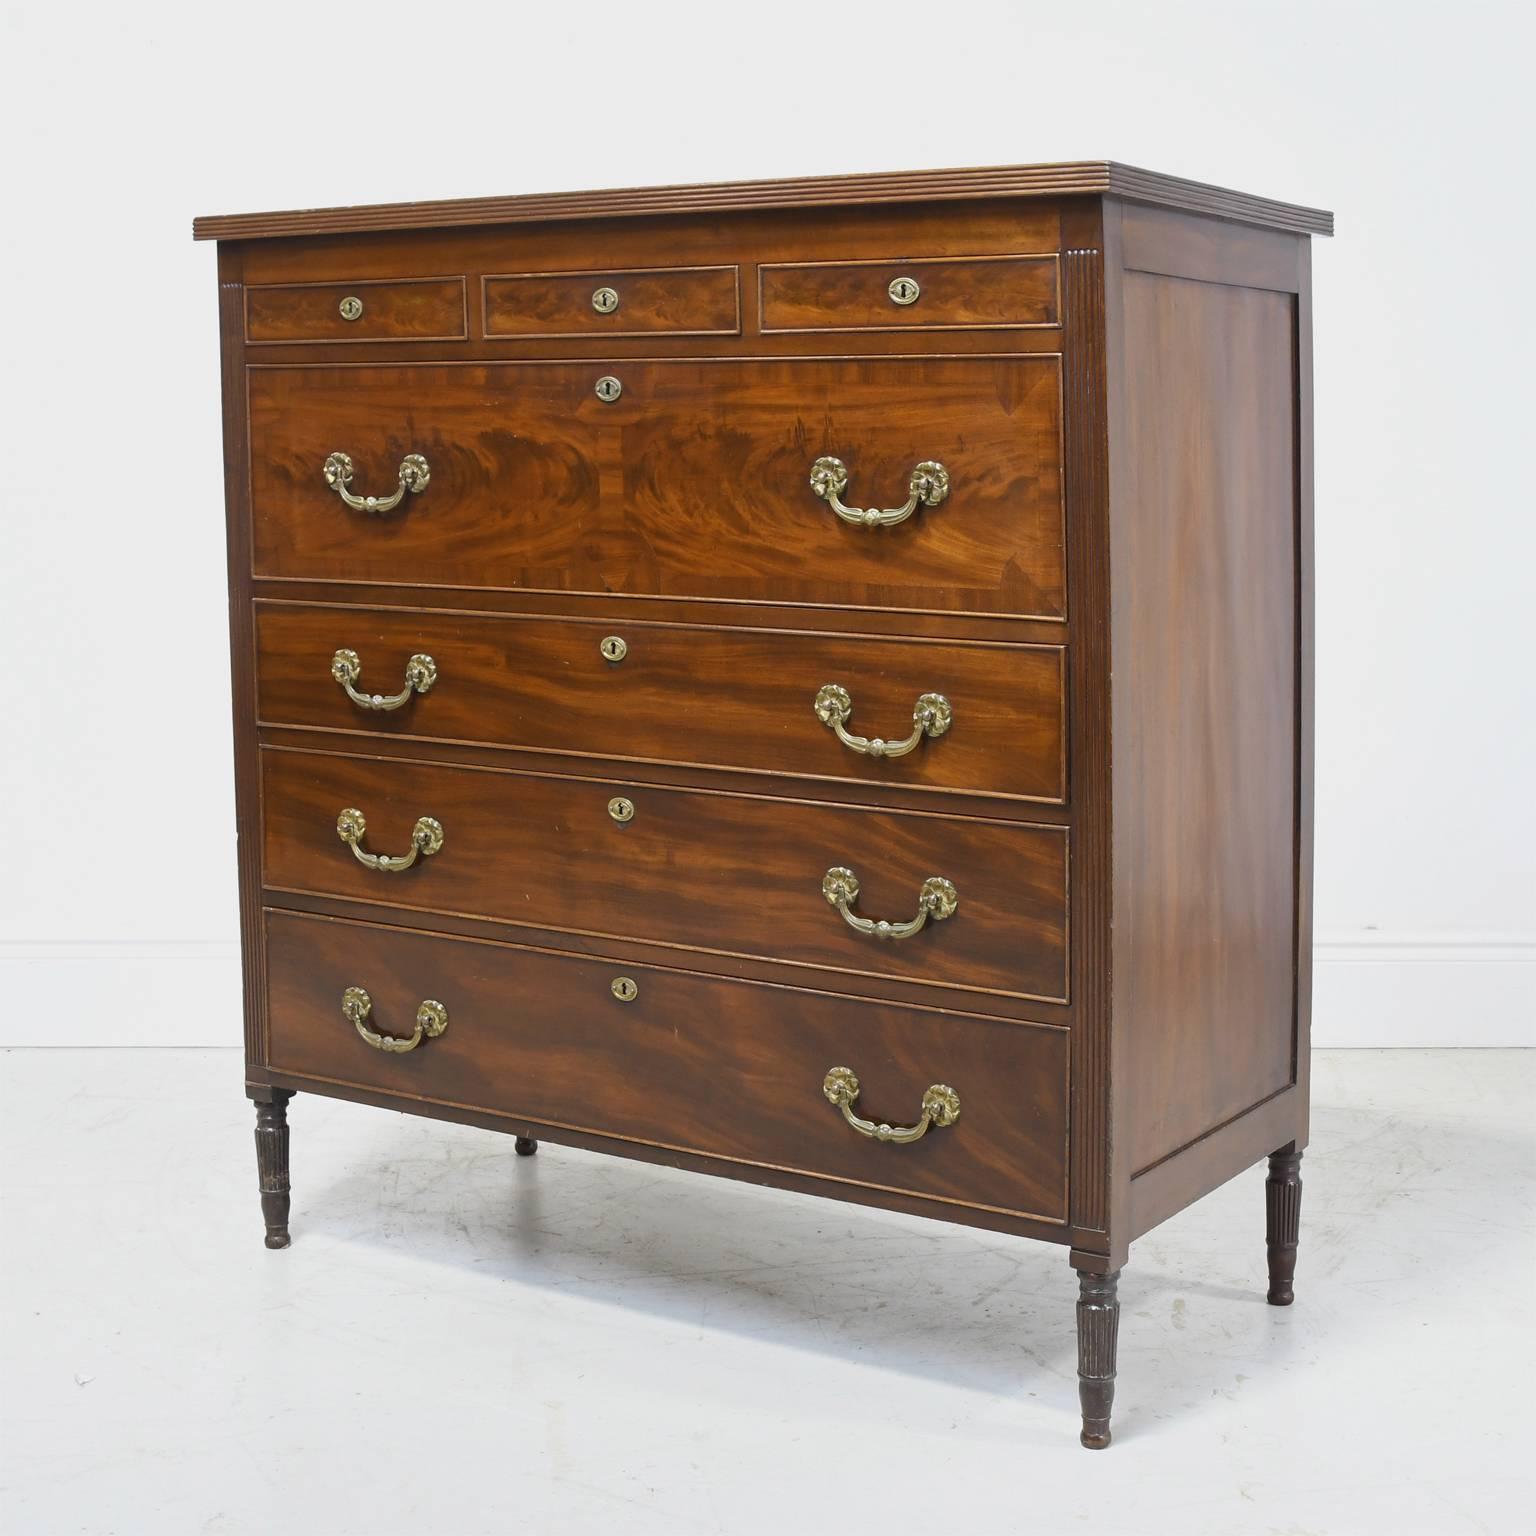 Beautiful historic NYC Chest of Drawers by the renowned New York cabinet maker and biographer to Duncan Phyfe Ernest F. Hagen.  Hagen signed this chest of drawers in several places and then wrote in pencil on the underside of the top left drawer the